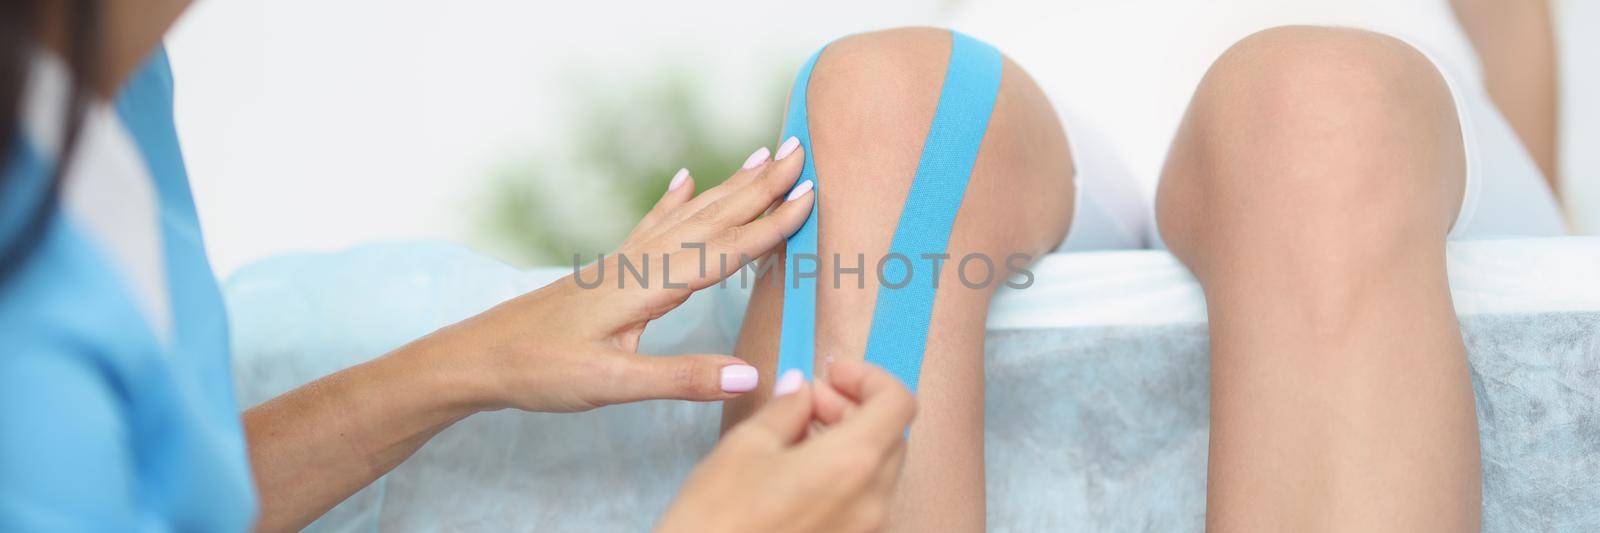 Close-up of physiotherapist applying kinesiology tape to patient knee, kinesiology taping. Post traumatic rehabilitation, sport physical therapy, medicine, healthcare concept